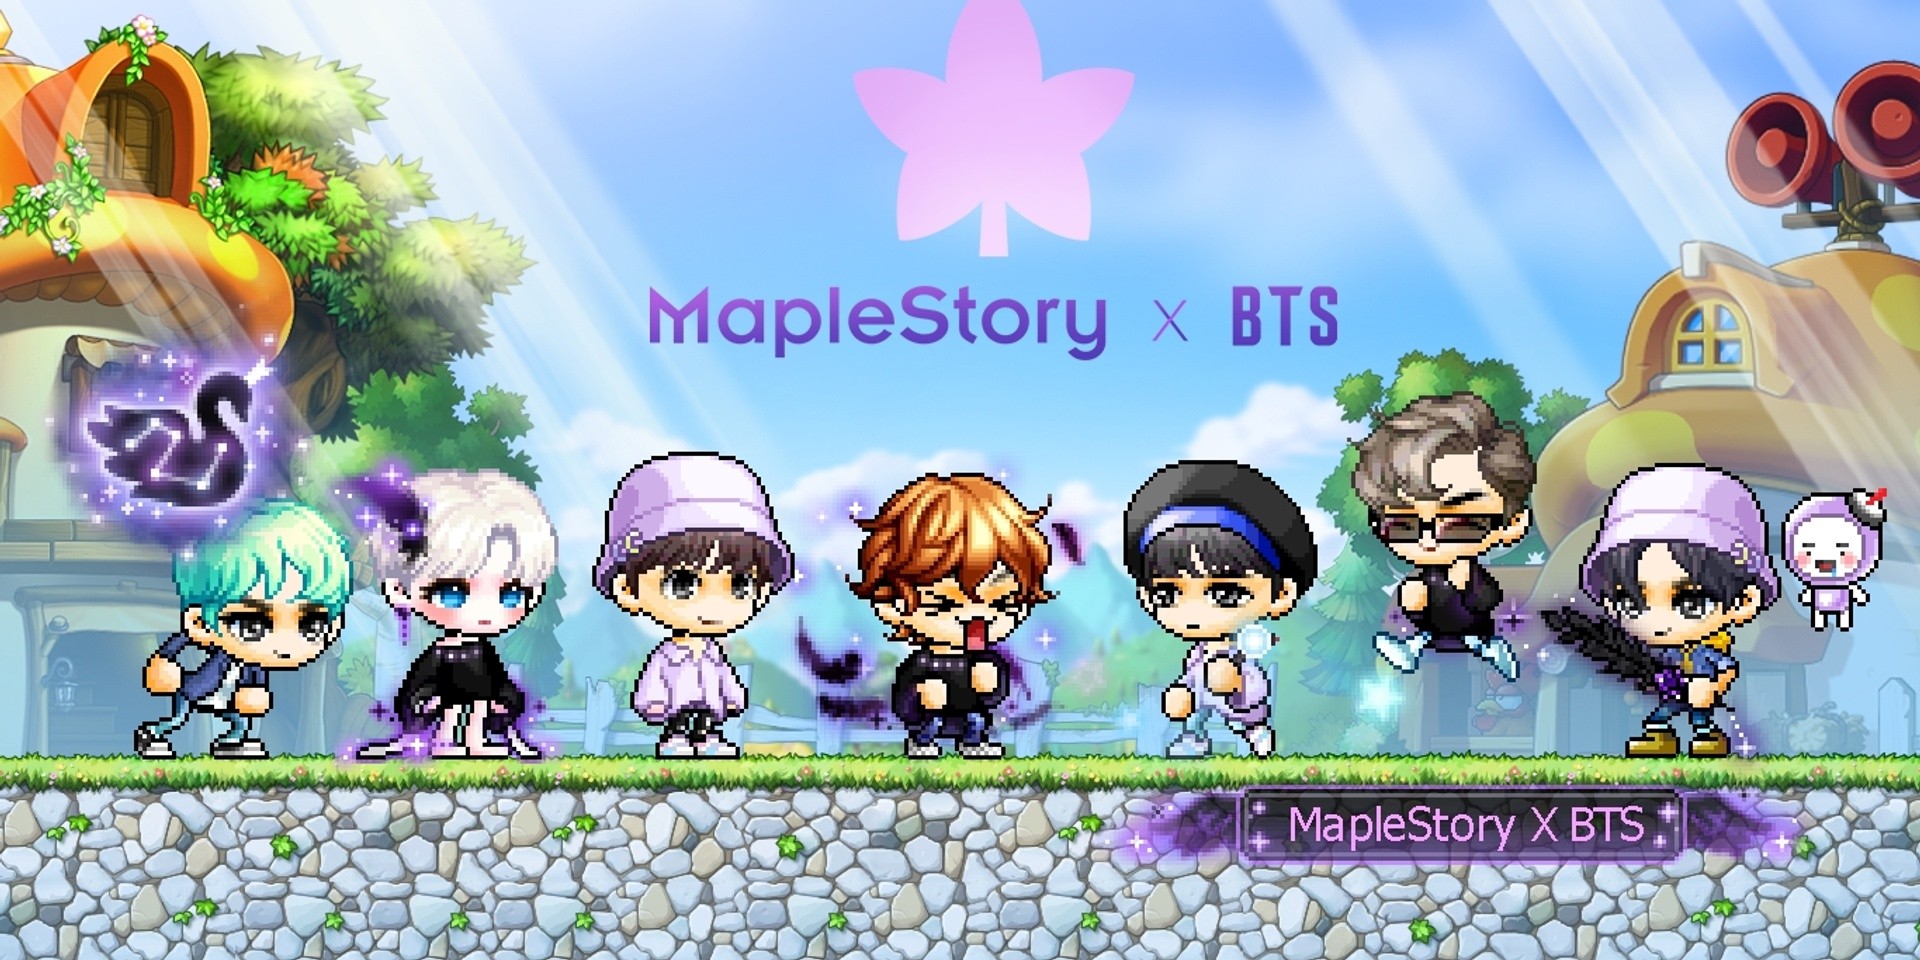 BTS unveil collaboration with online game, MapleStory